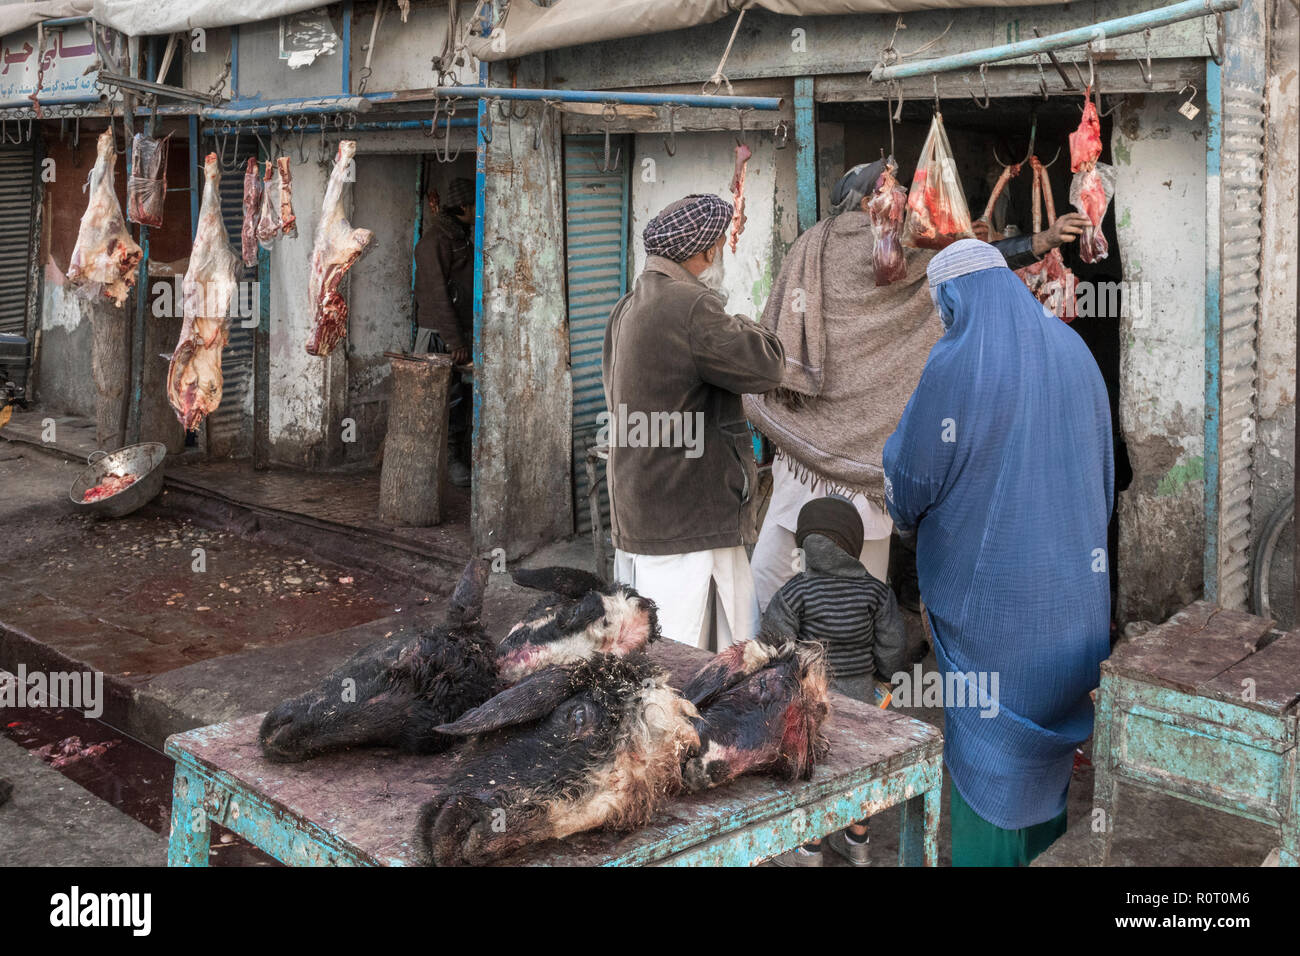 Husband And Wife Wearing Blue Burqa Buyig Meat From A Butcher At The Mazar-e Sharif Central Bazaar, Maraz-e Sharif, Balkh Province, Afghanistan Stock Photo